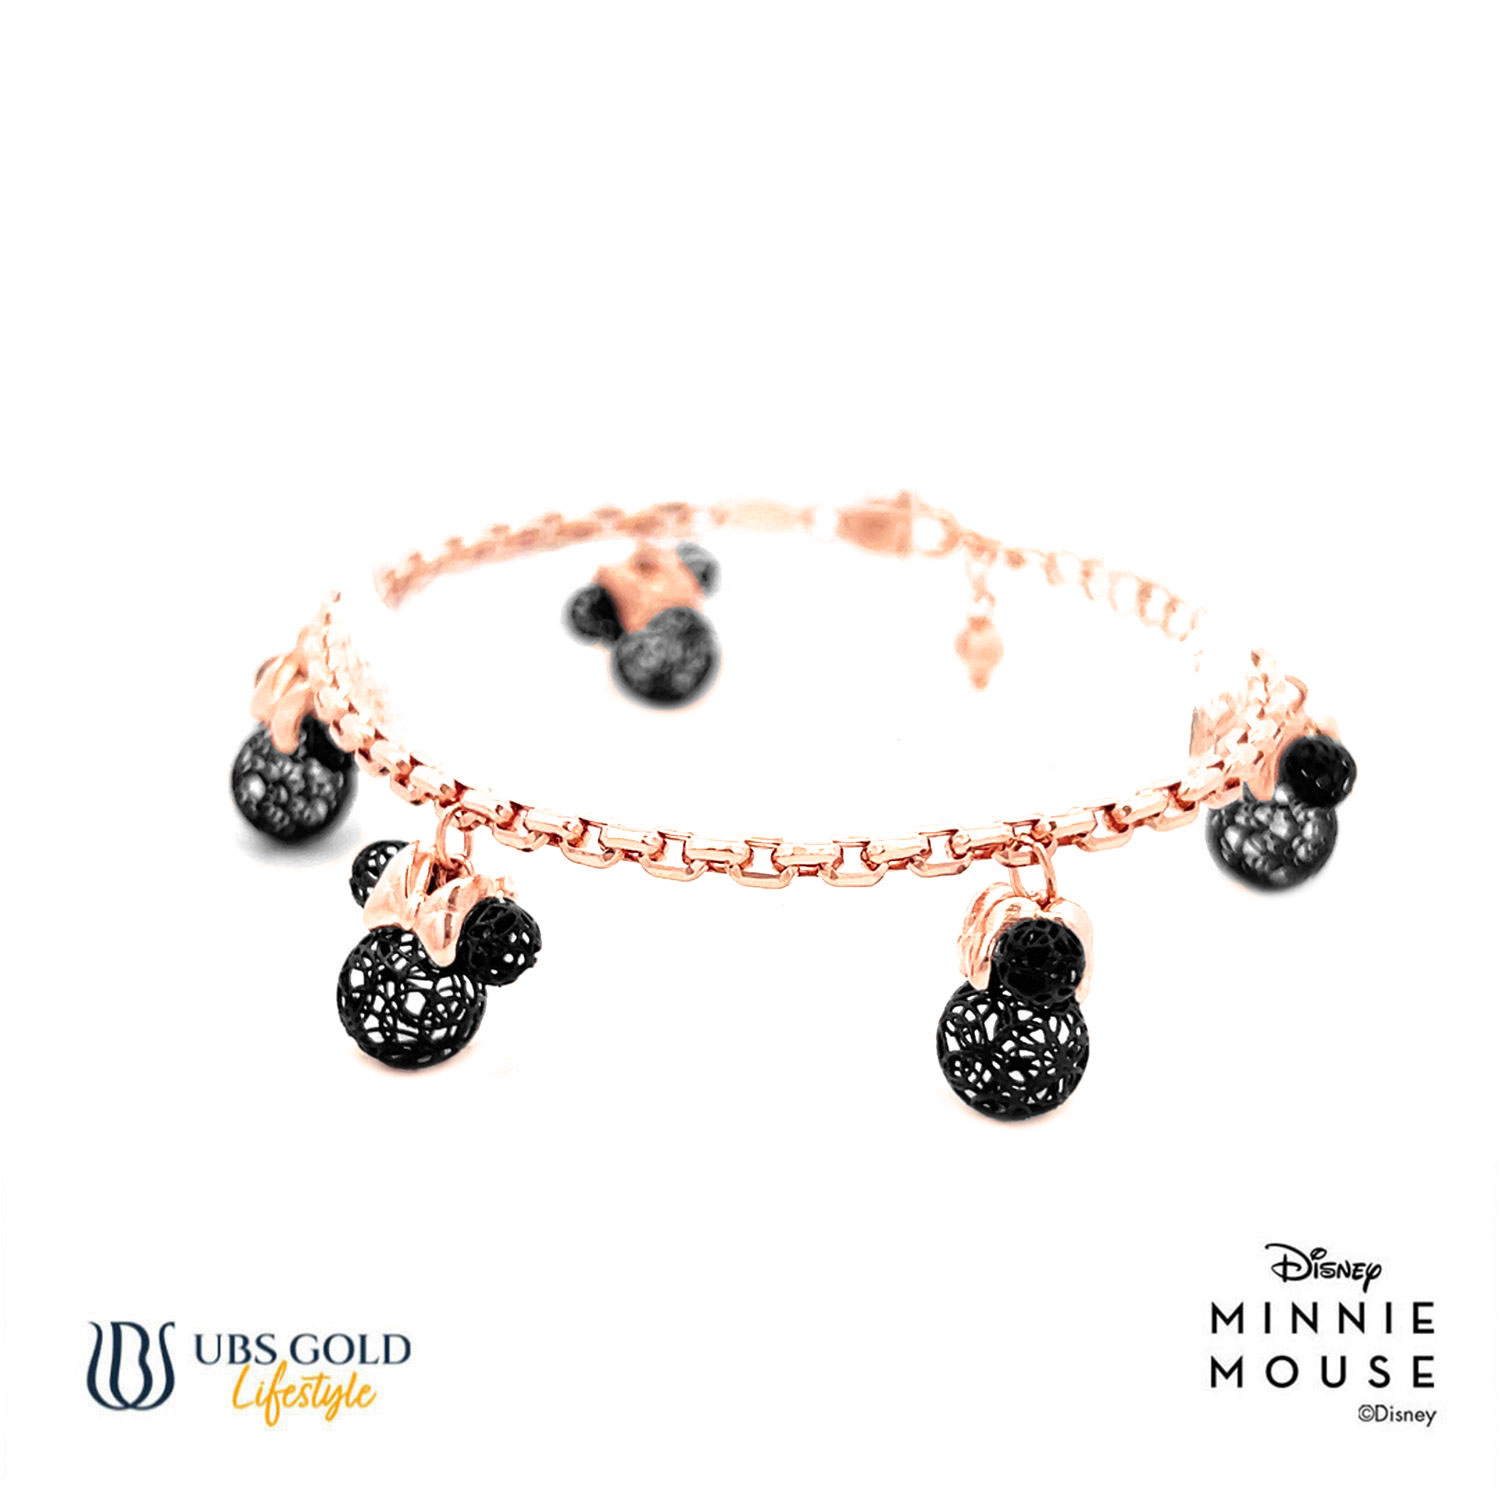 UBS Gold Gelang Emas Disney Minnie Mouse - Hgy0148B - 17K